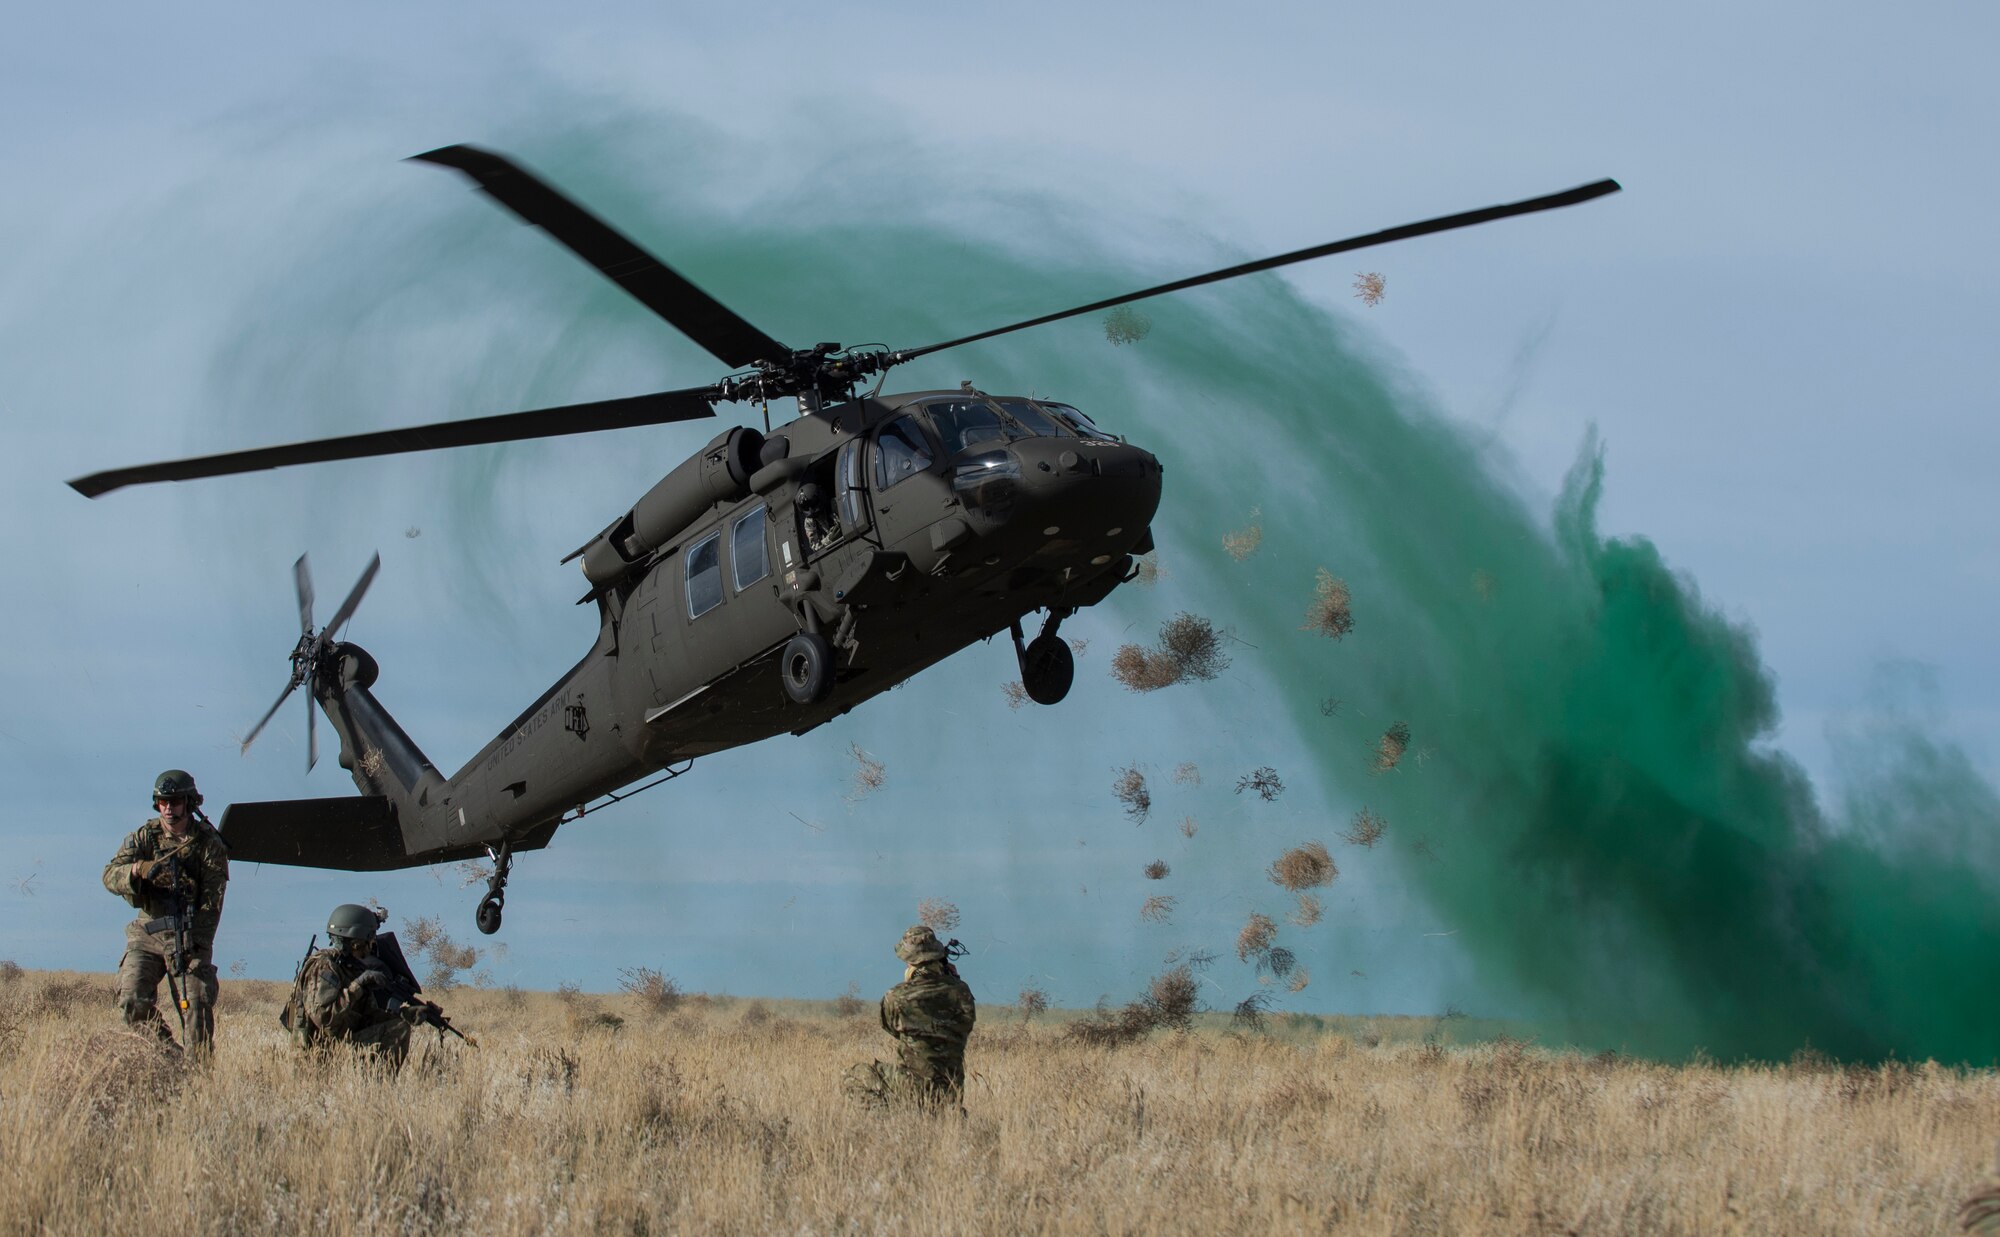 A UH-60 Black Hawk sets down during a capstone training event Nov. 6, 2014, at Sailor Creek Range Complex, Idaho. Members of the 366th Fighter Wing train alongside U.S. Army and U.S. Marine Corp affiliates to execute realistic operation scenarios, which will allow them to operate in a tactical environment. (U.S. Air Force photo/Staff Sgt. Roy Lynch)